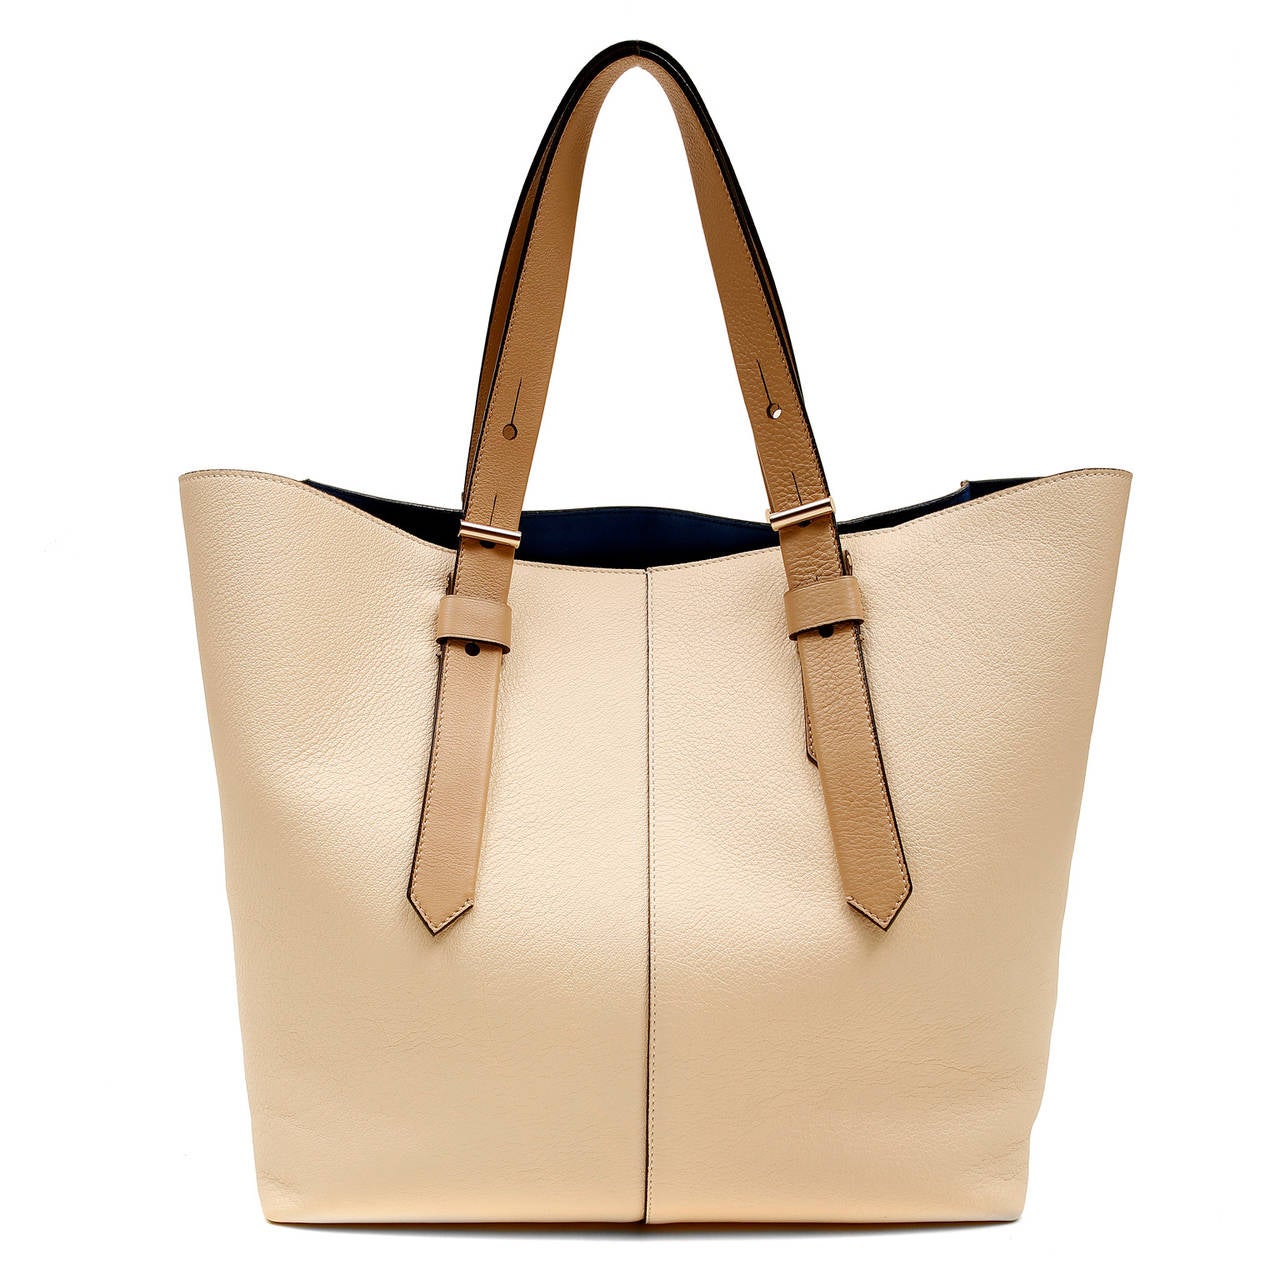 Reed Krakoff Camel Two Tone Leather Krush Tote - NEW, never carried

 The sophisticated roomy tote is perfect for professional, travel or casual chic enjoyment. 
 
Milled leather large tote is camel on the front and a lighter beige on the sides,